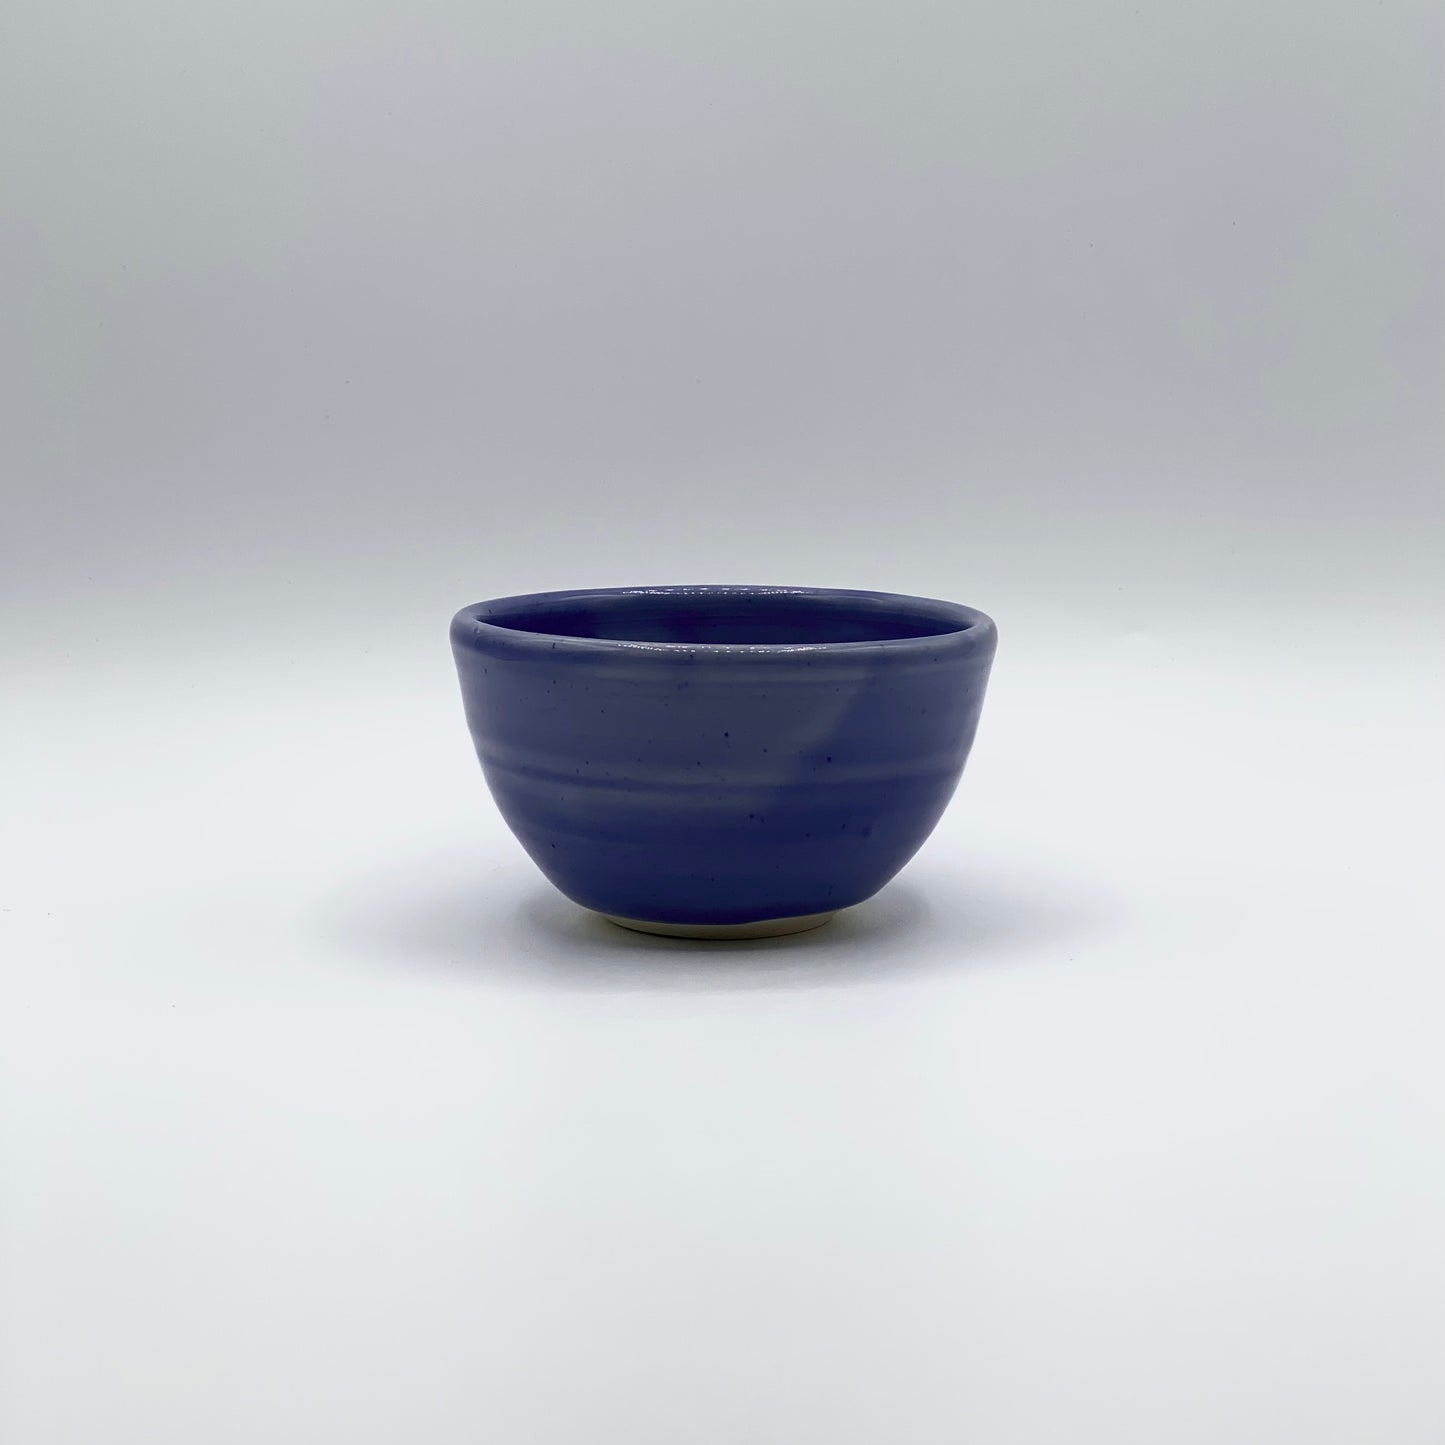 Ice Cream Bowl by Ginette Arsenault